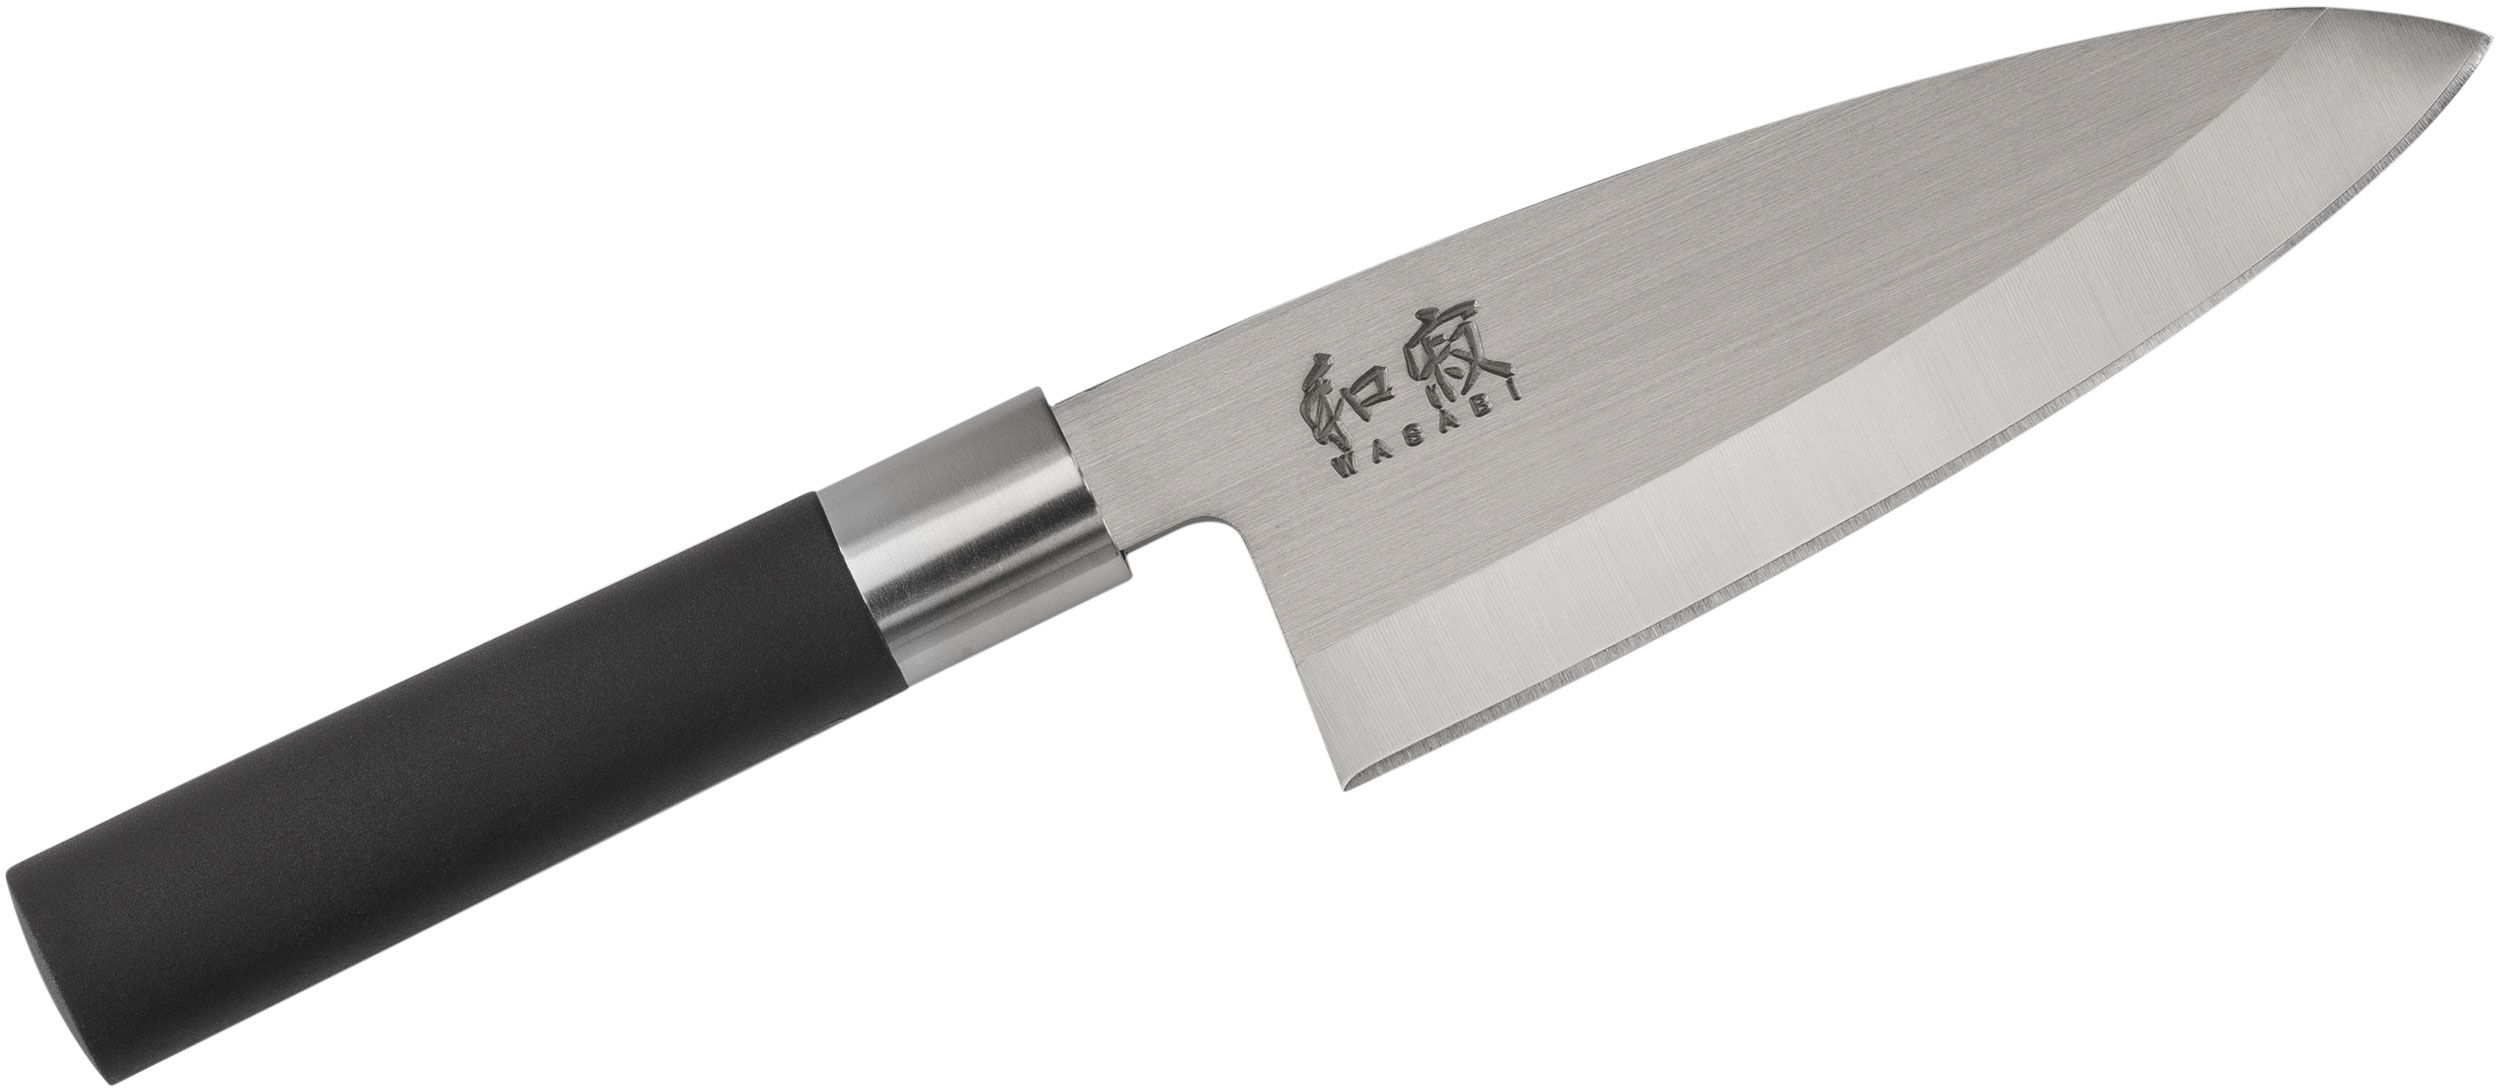 Wasabi filleting knives - Tools and Accessories